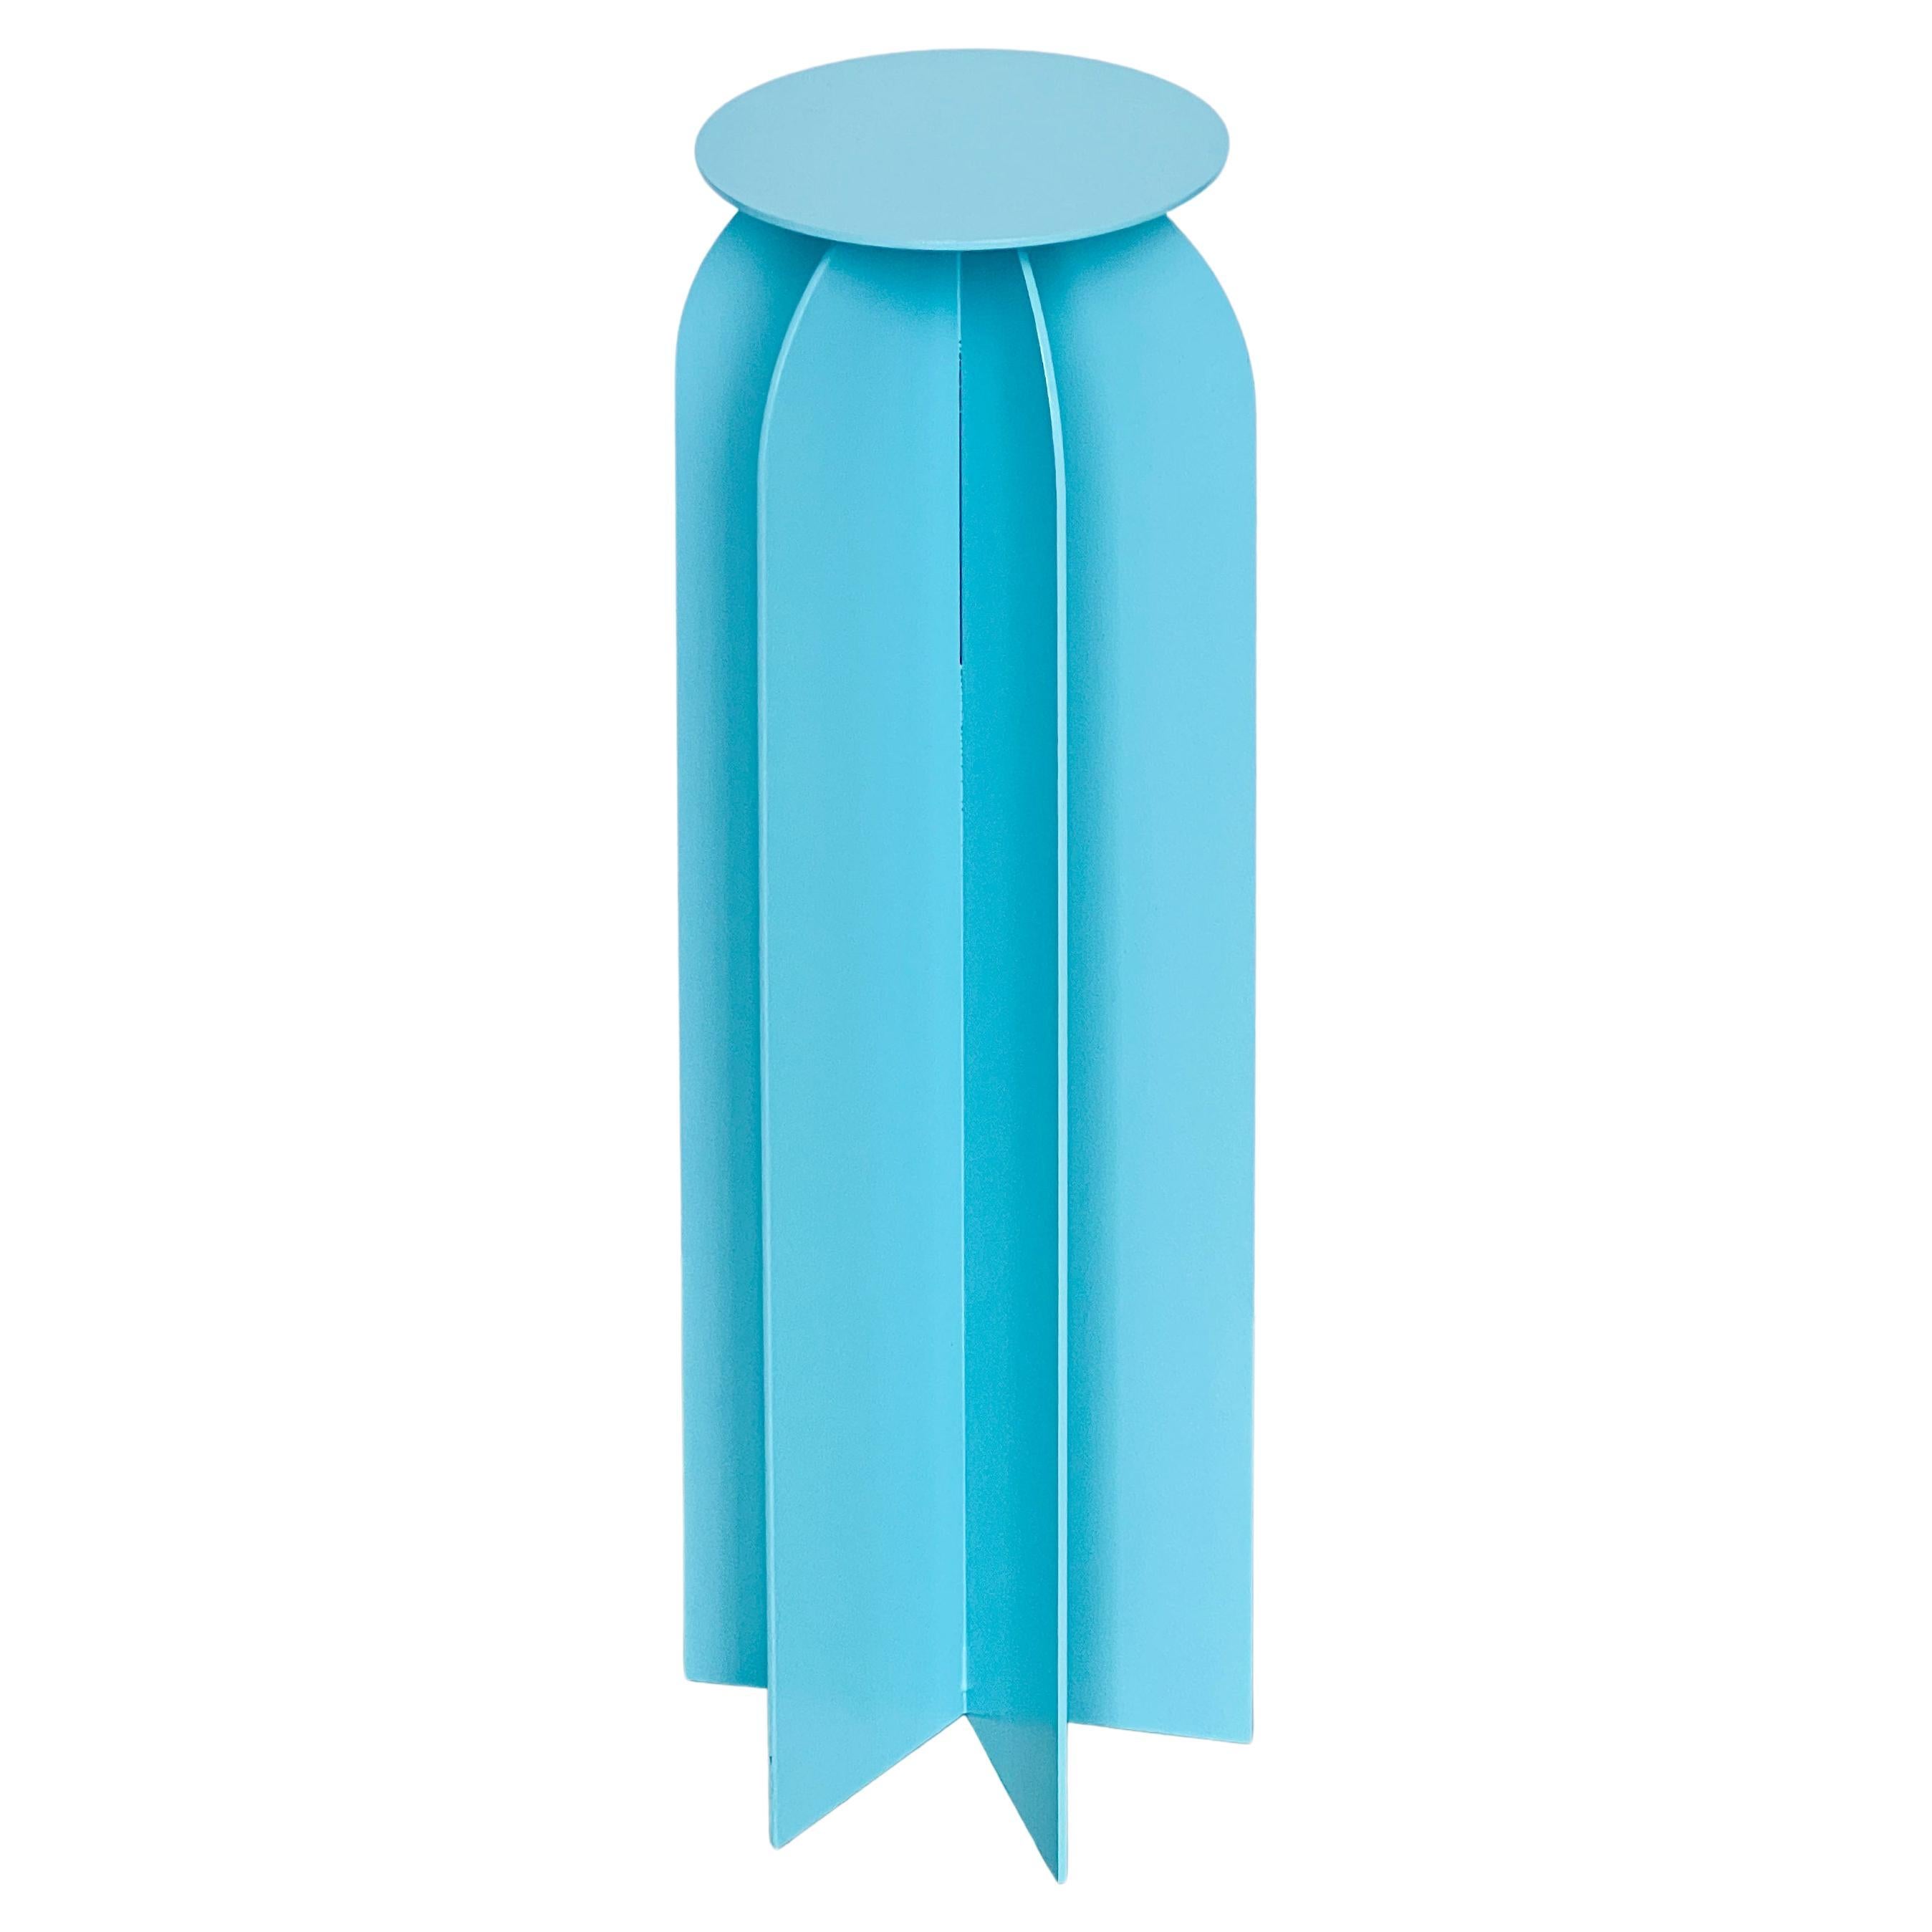 Table d'appoint Palladium Blue Tiffany, design de collection, MDW 2024 Edition